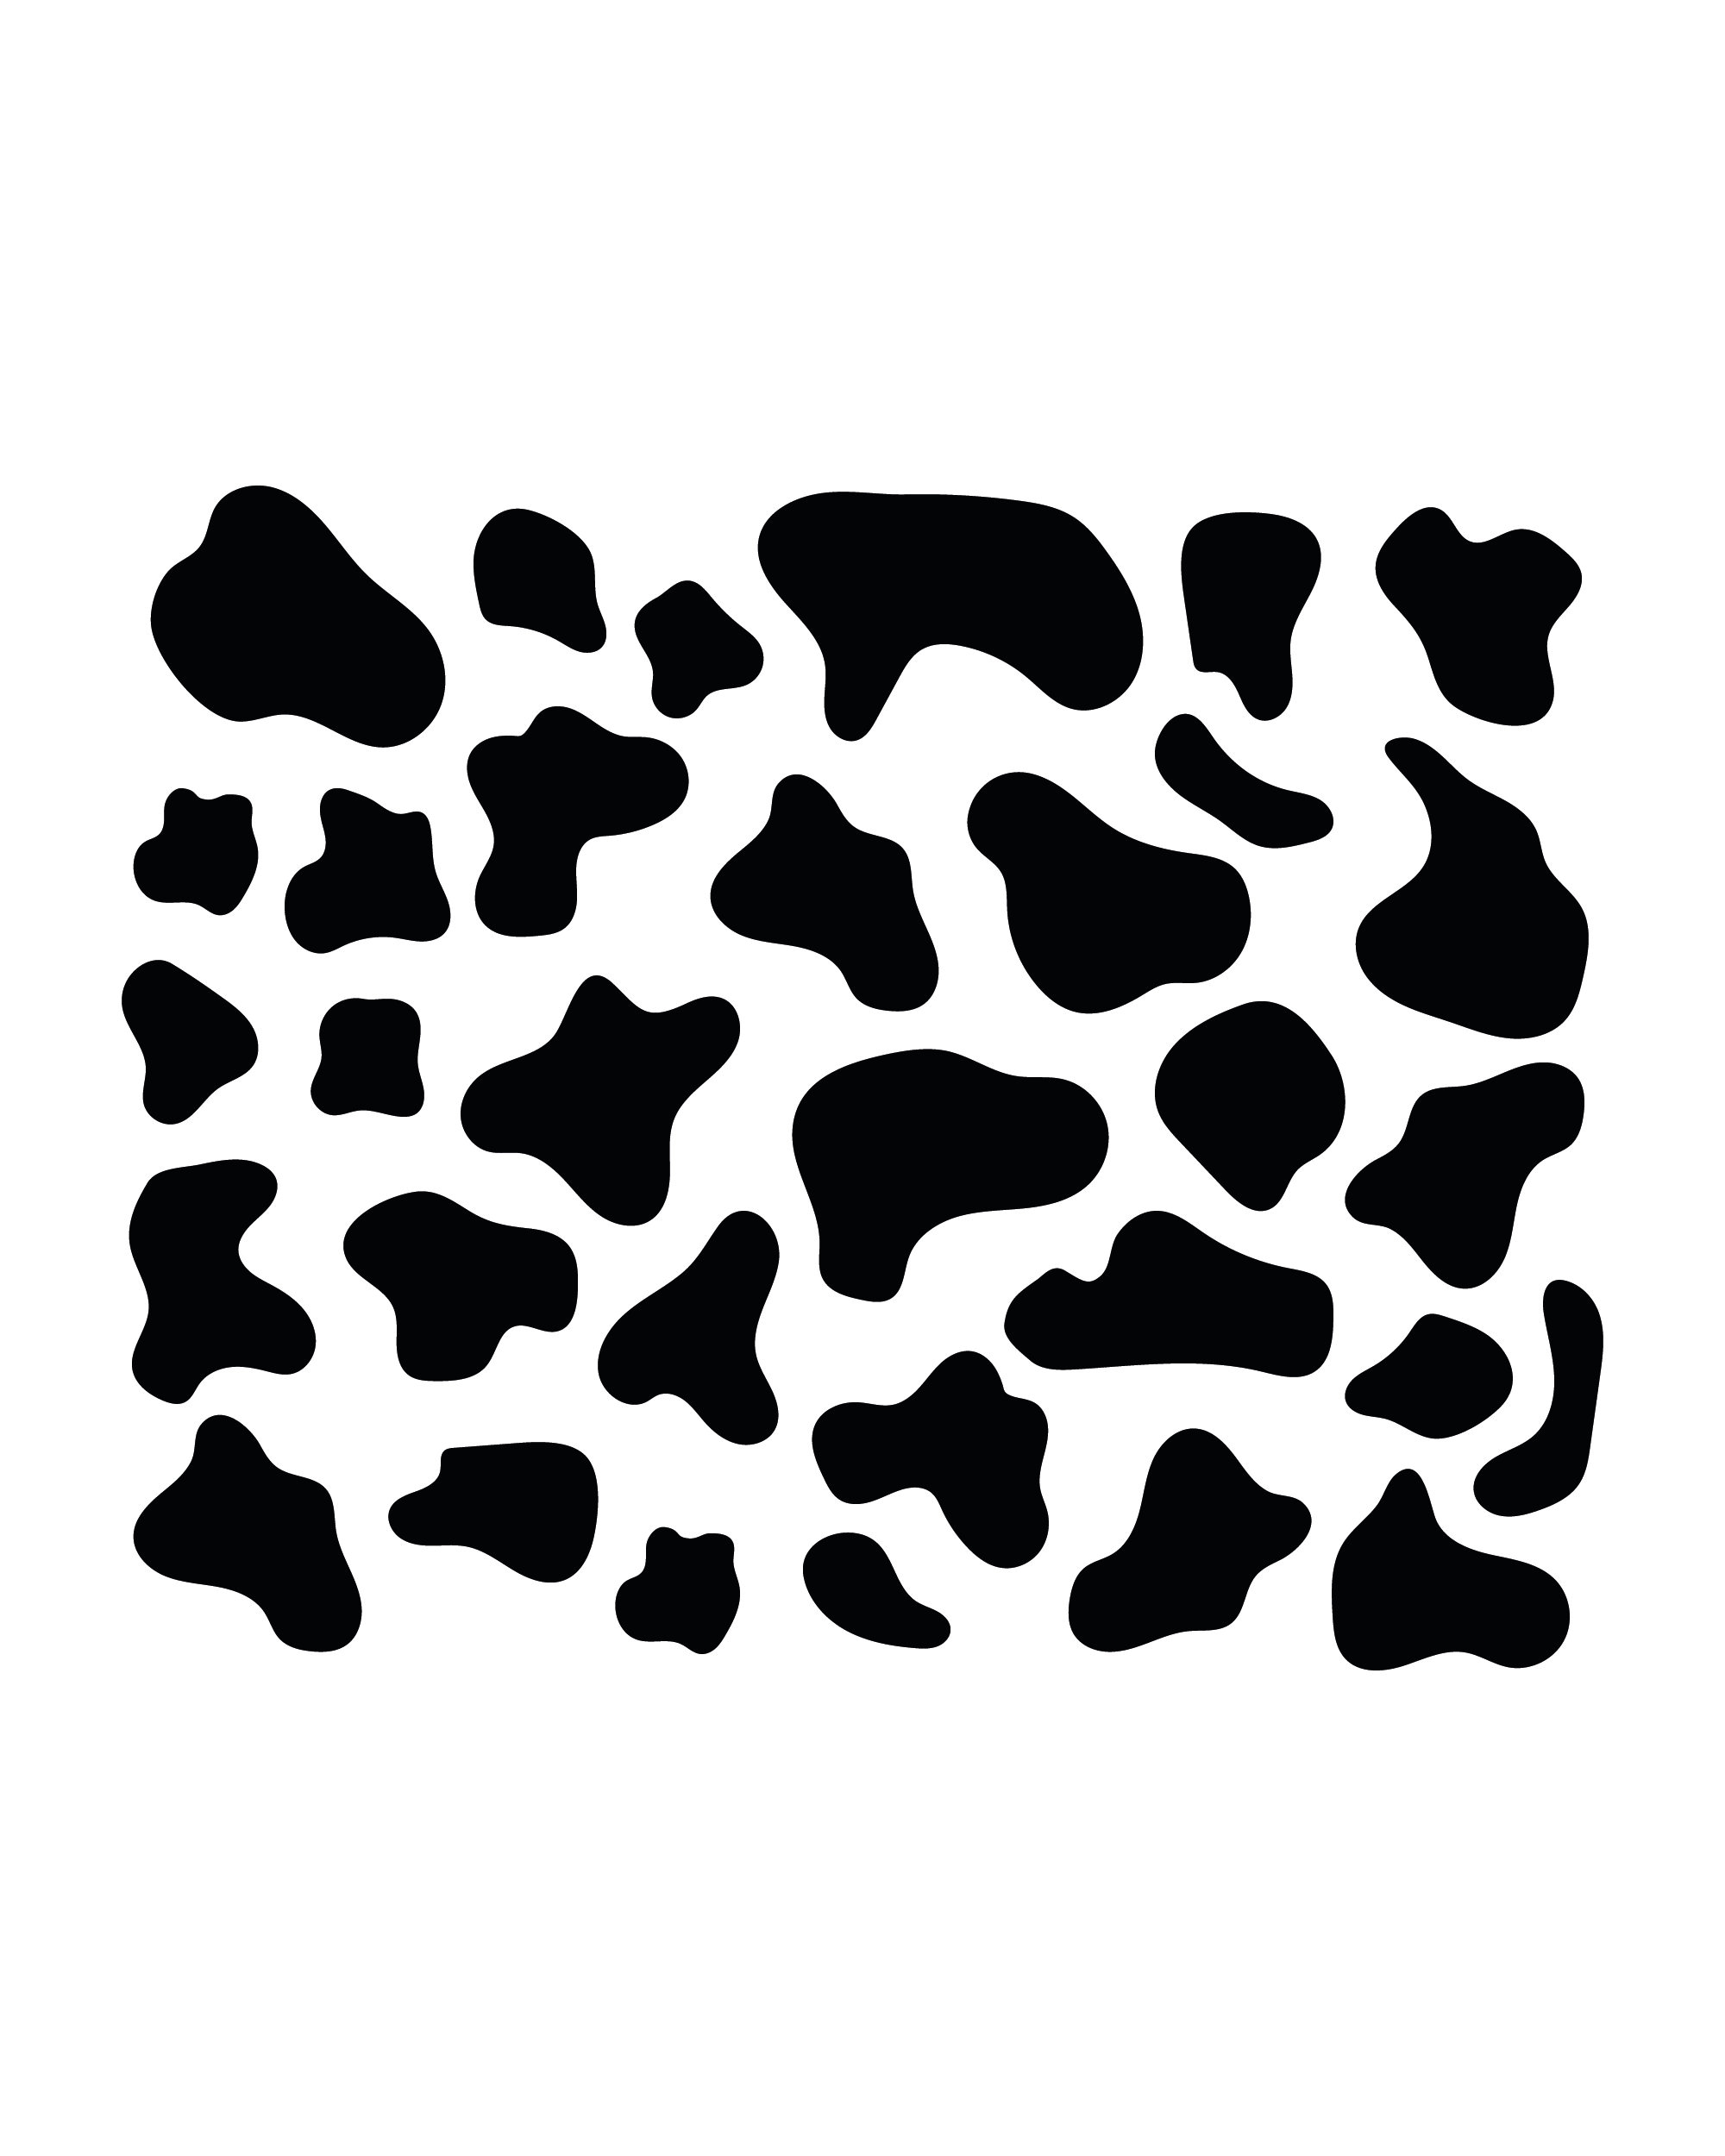 Cow Print Wall Stickers 142x Black Cow Spot Decals Animal Decor